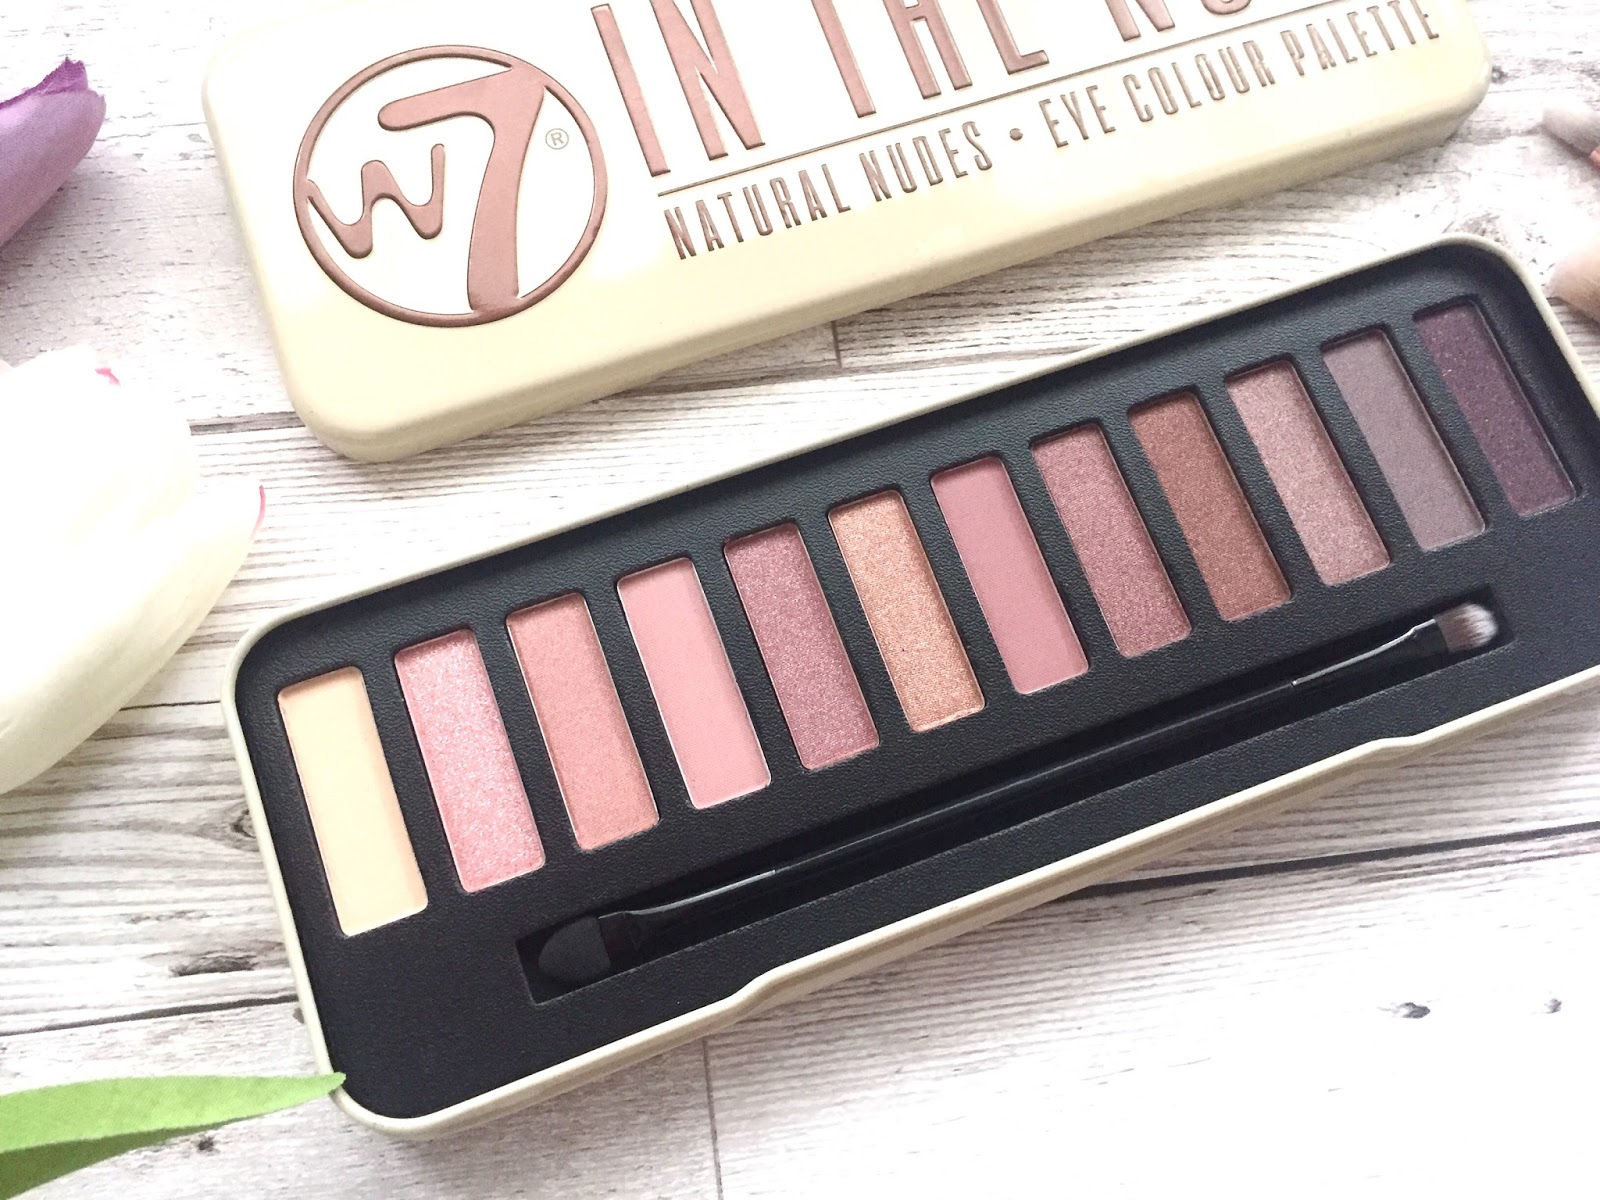 Review W7 In The Nude Eyeshadow Palette Is This An Urban Images, Photos, Reviews